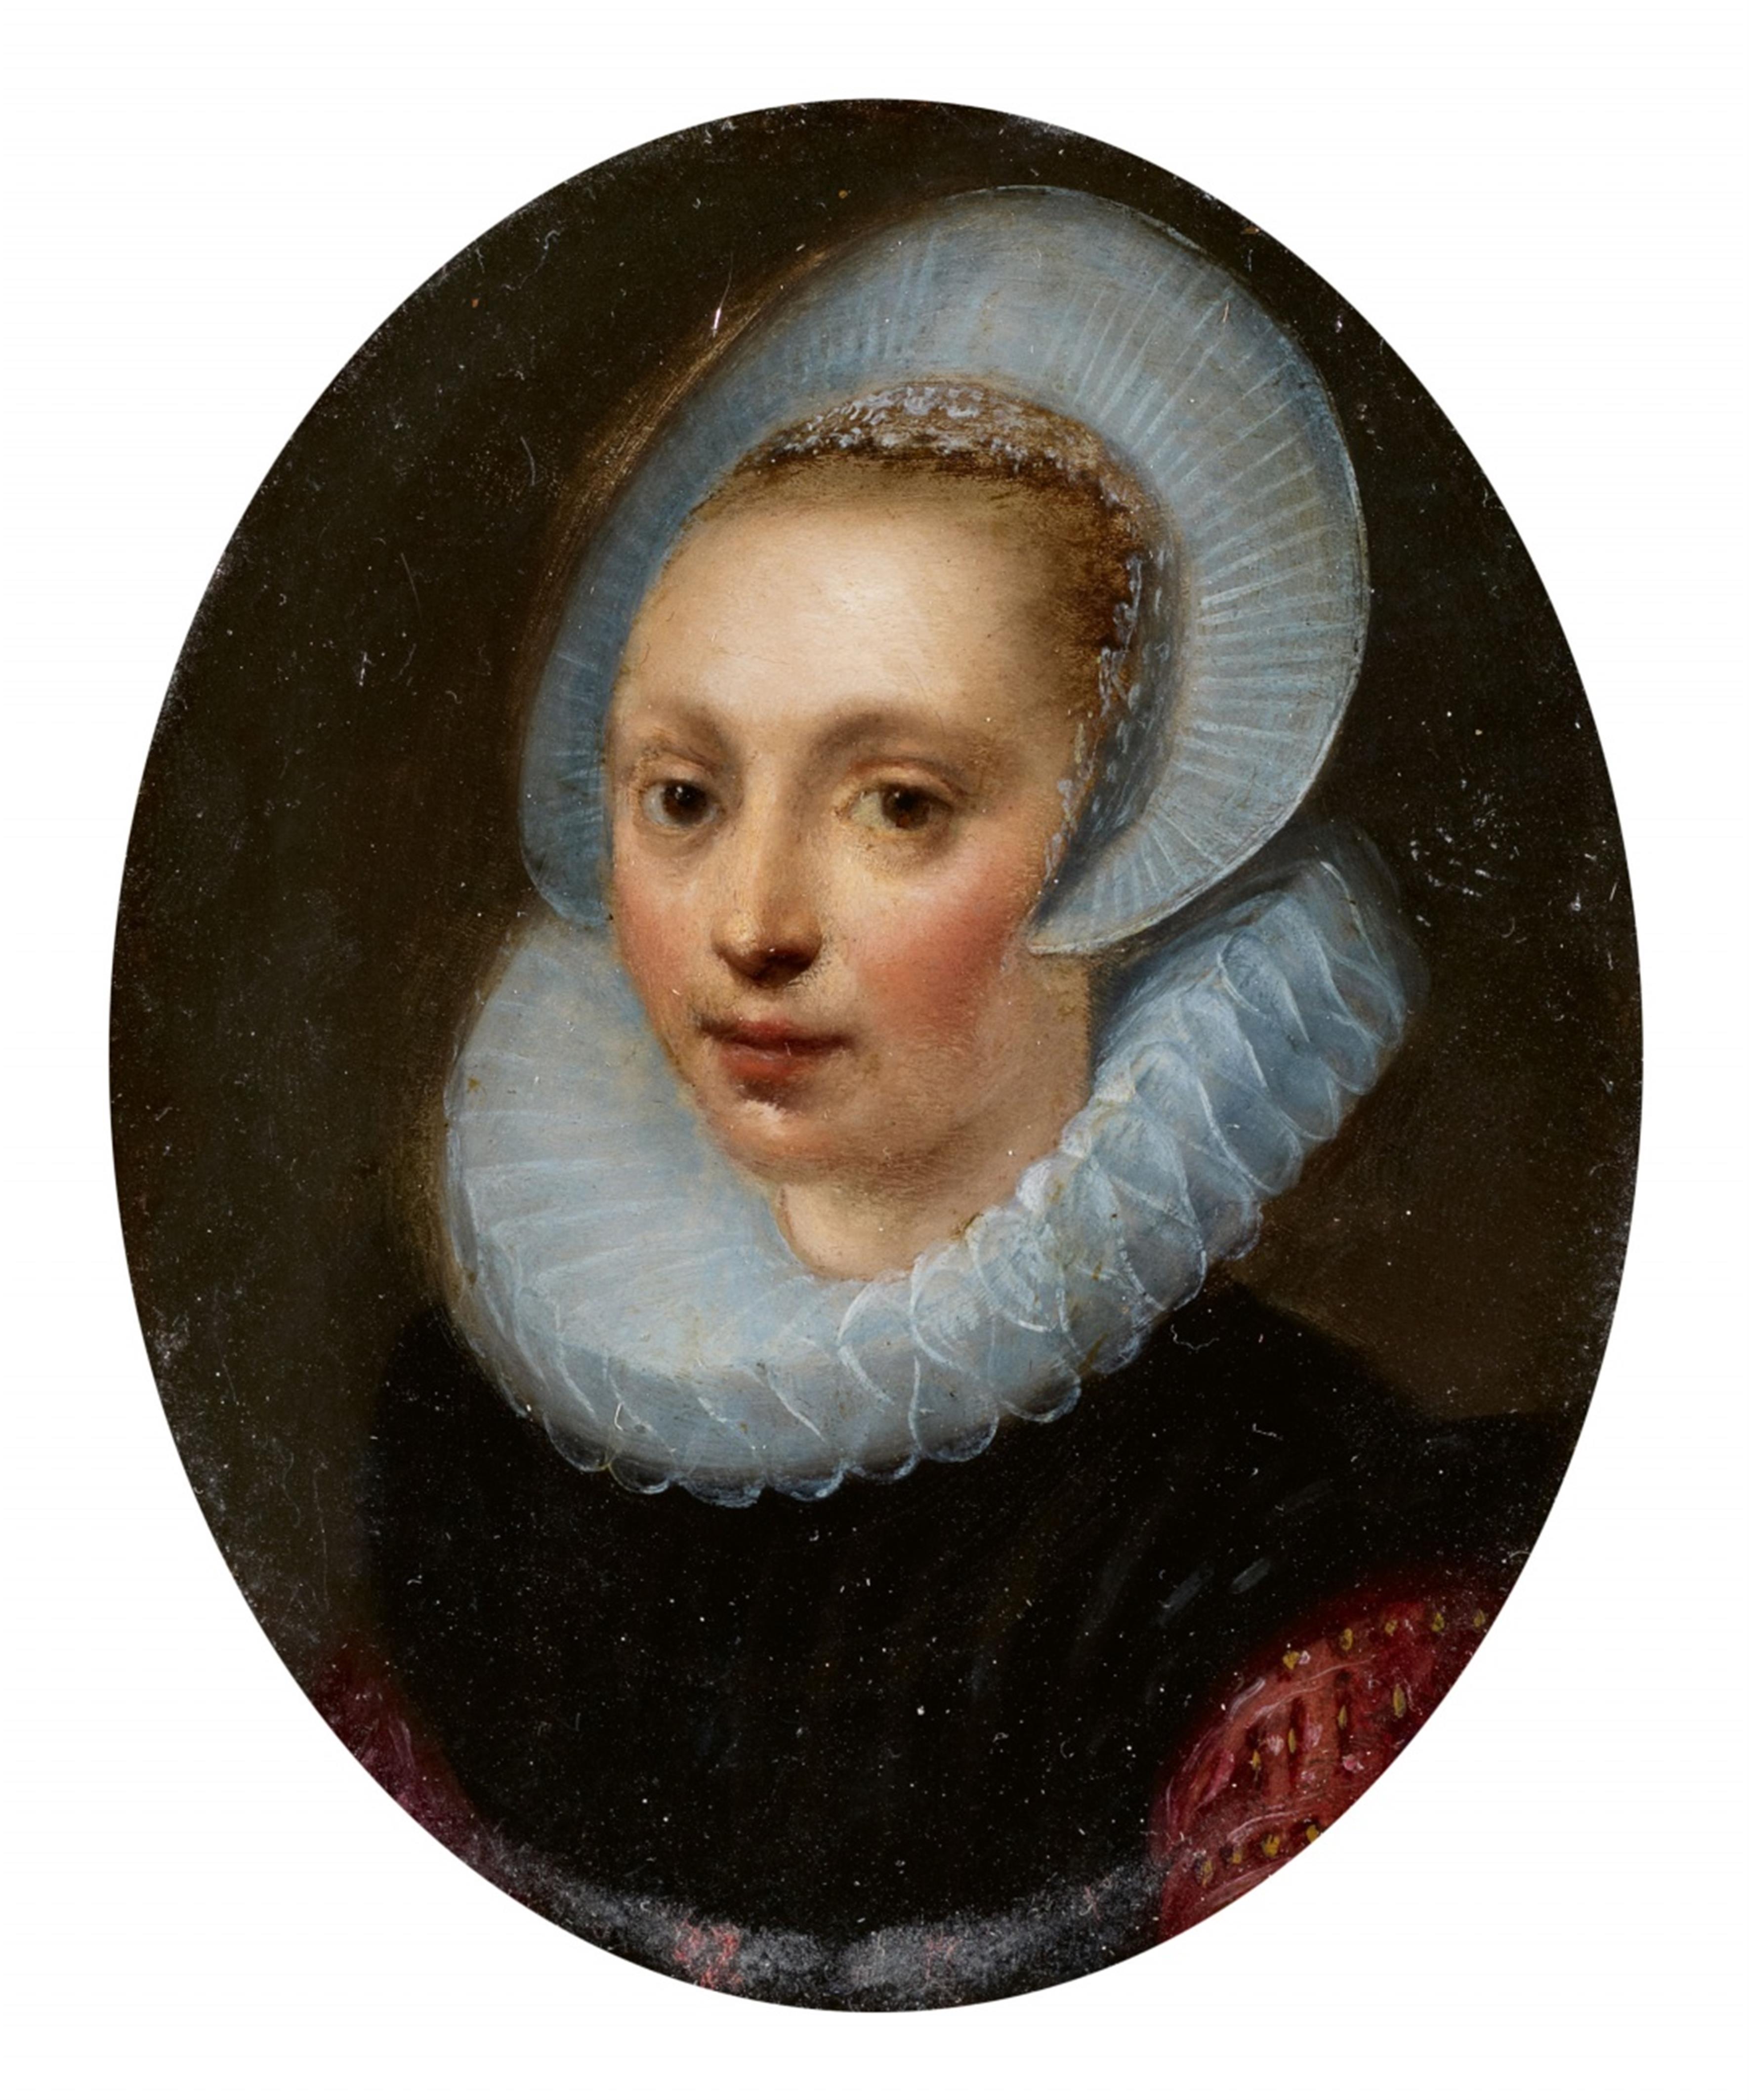 Gortzius Geldorp, attributed to - Portrait of a Young Lady in a Bonnet and Ruff - image-1